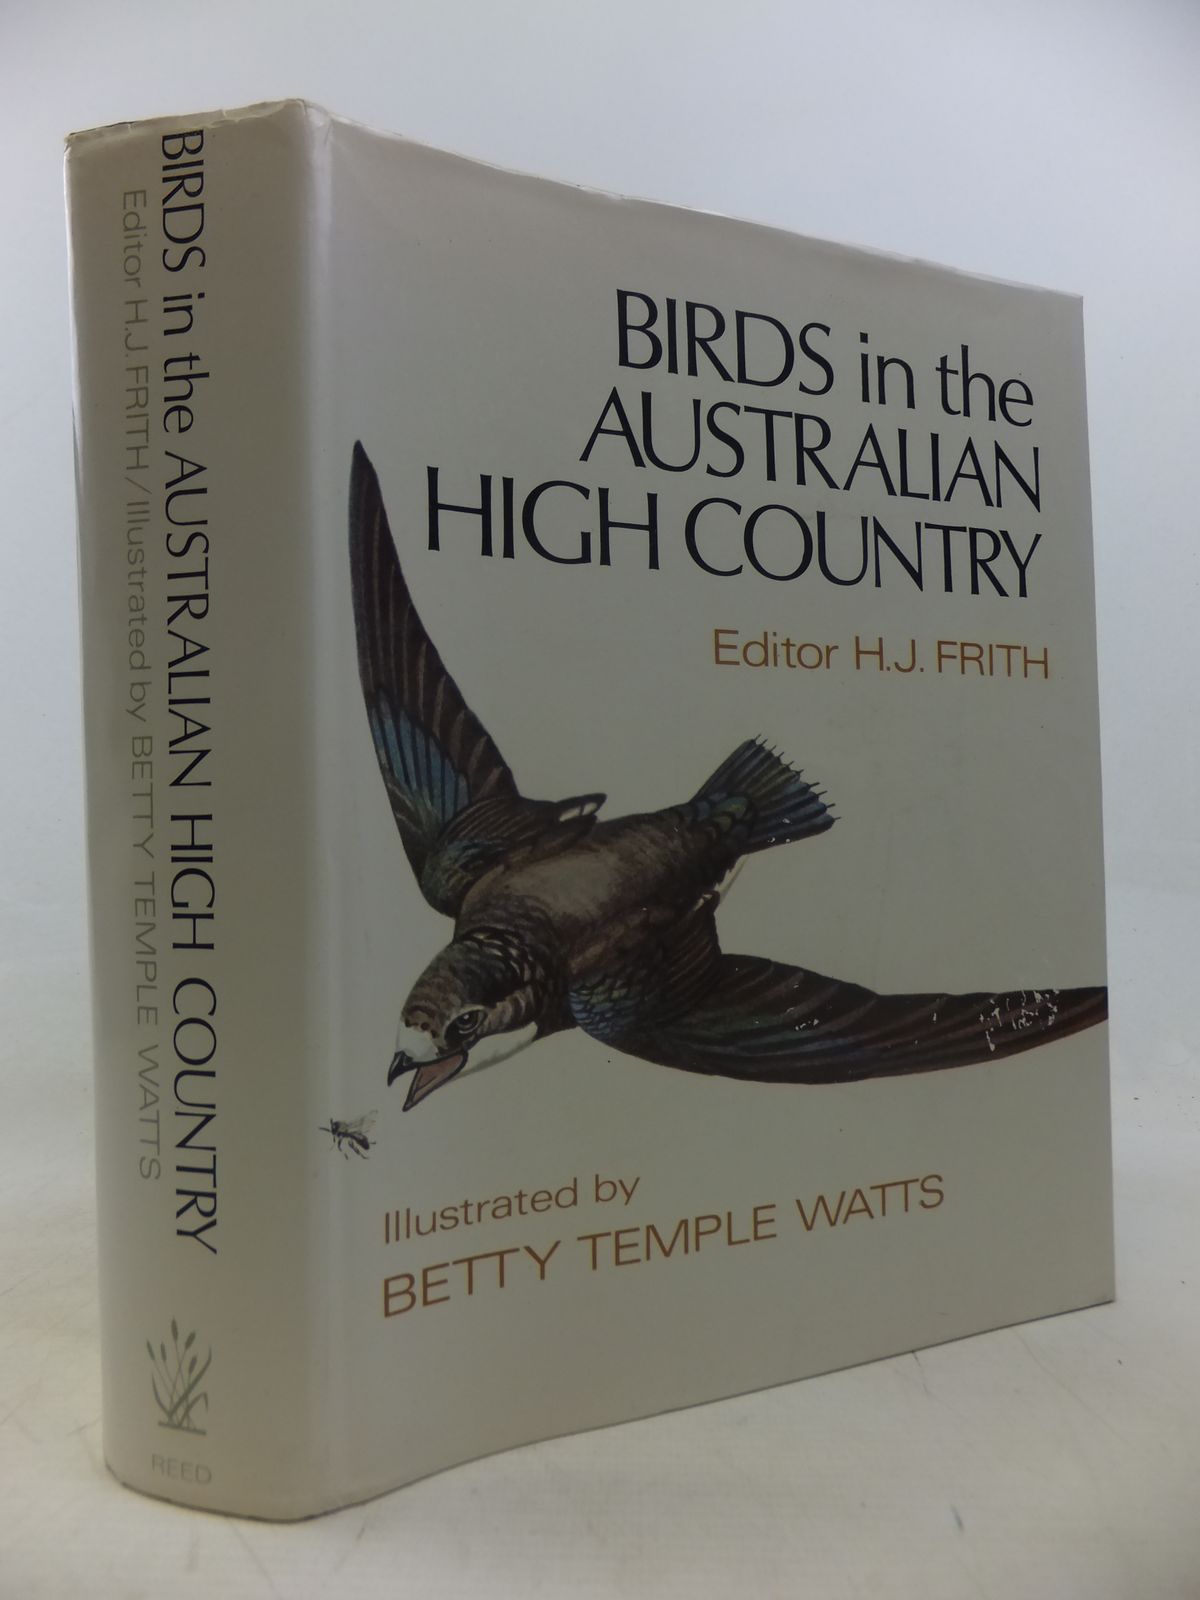 Stella & Rose's Books : BIRDS IN THE AUSTRALIAN HIGH COUNTRY ...